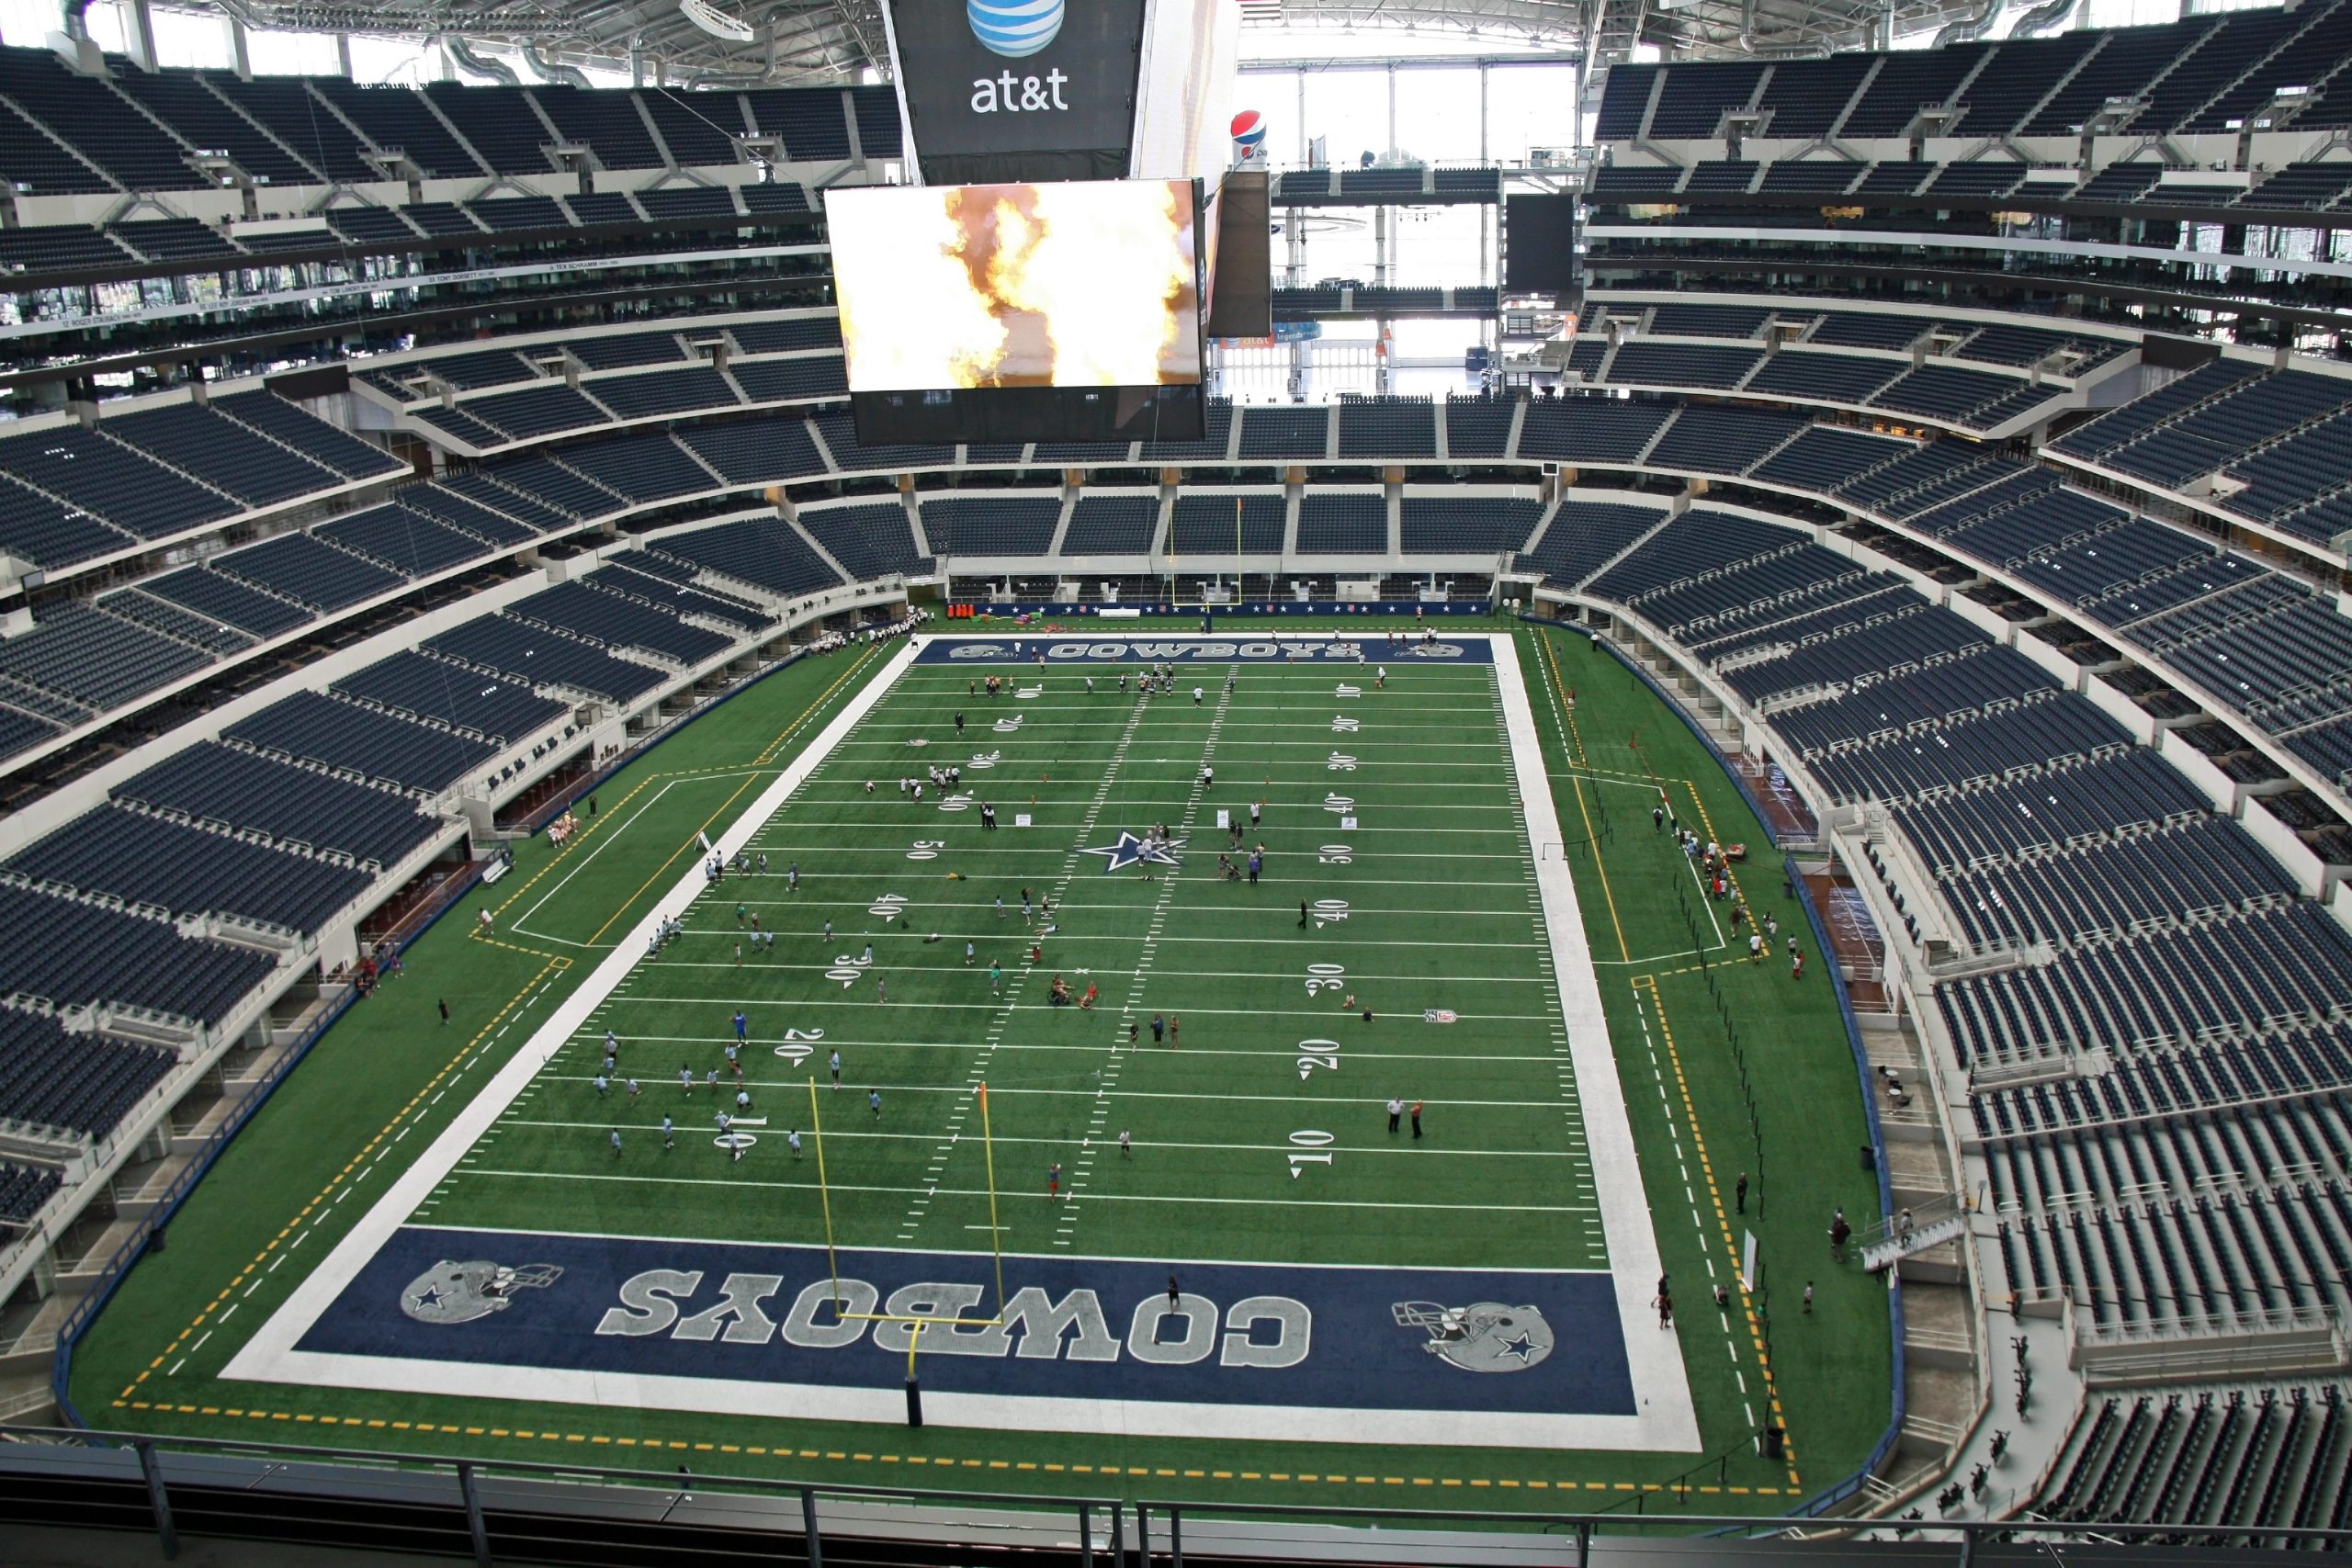 ARLINGTON - JUNE 17: Taken in Cowboys Stadium, Arlington, TX., on Thursday, June 17, 2010. An inside view of Cowboys Stadium and the giant video monitor from the endzone upper deck. Super Bowl XLV will played here in 2011.